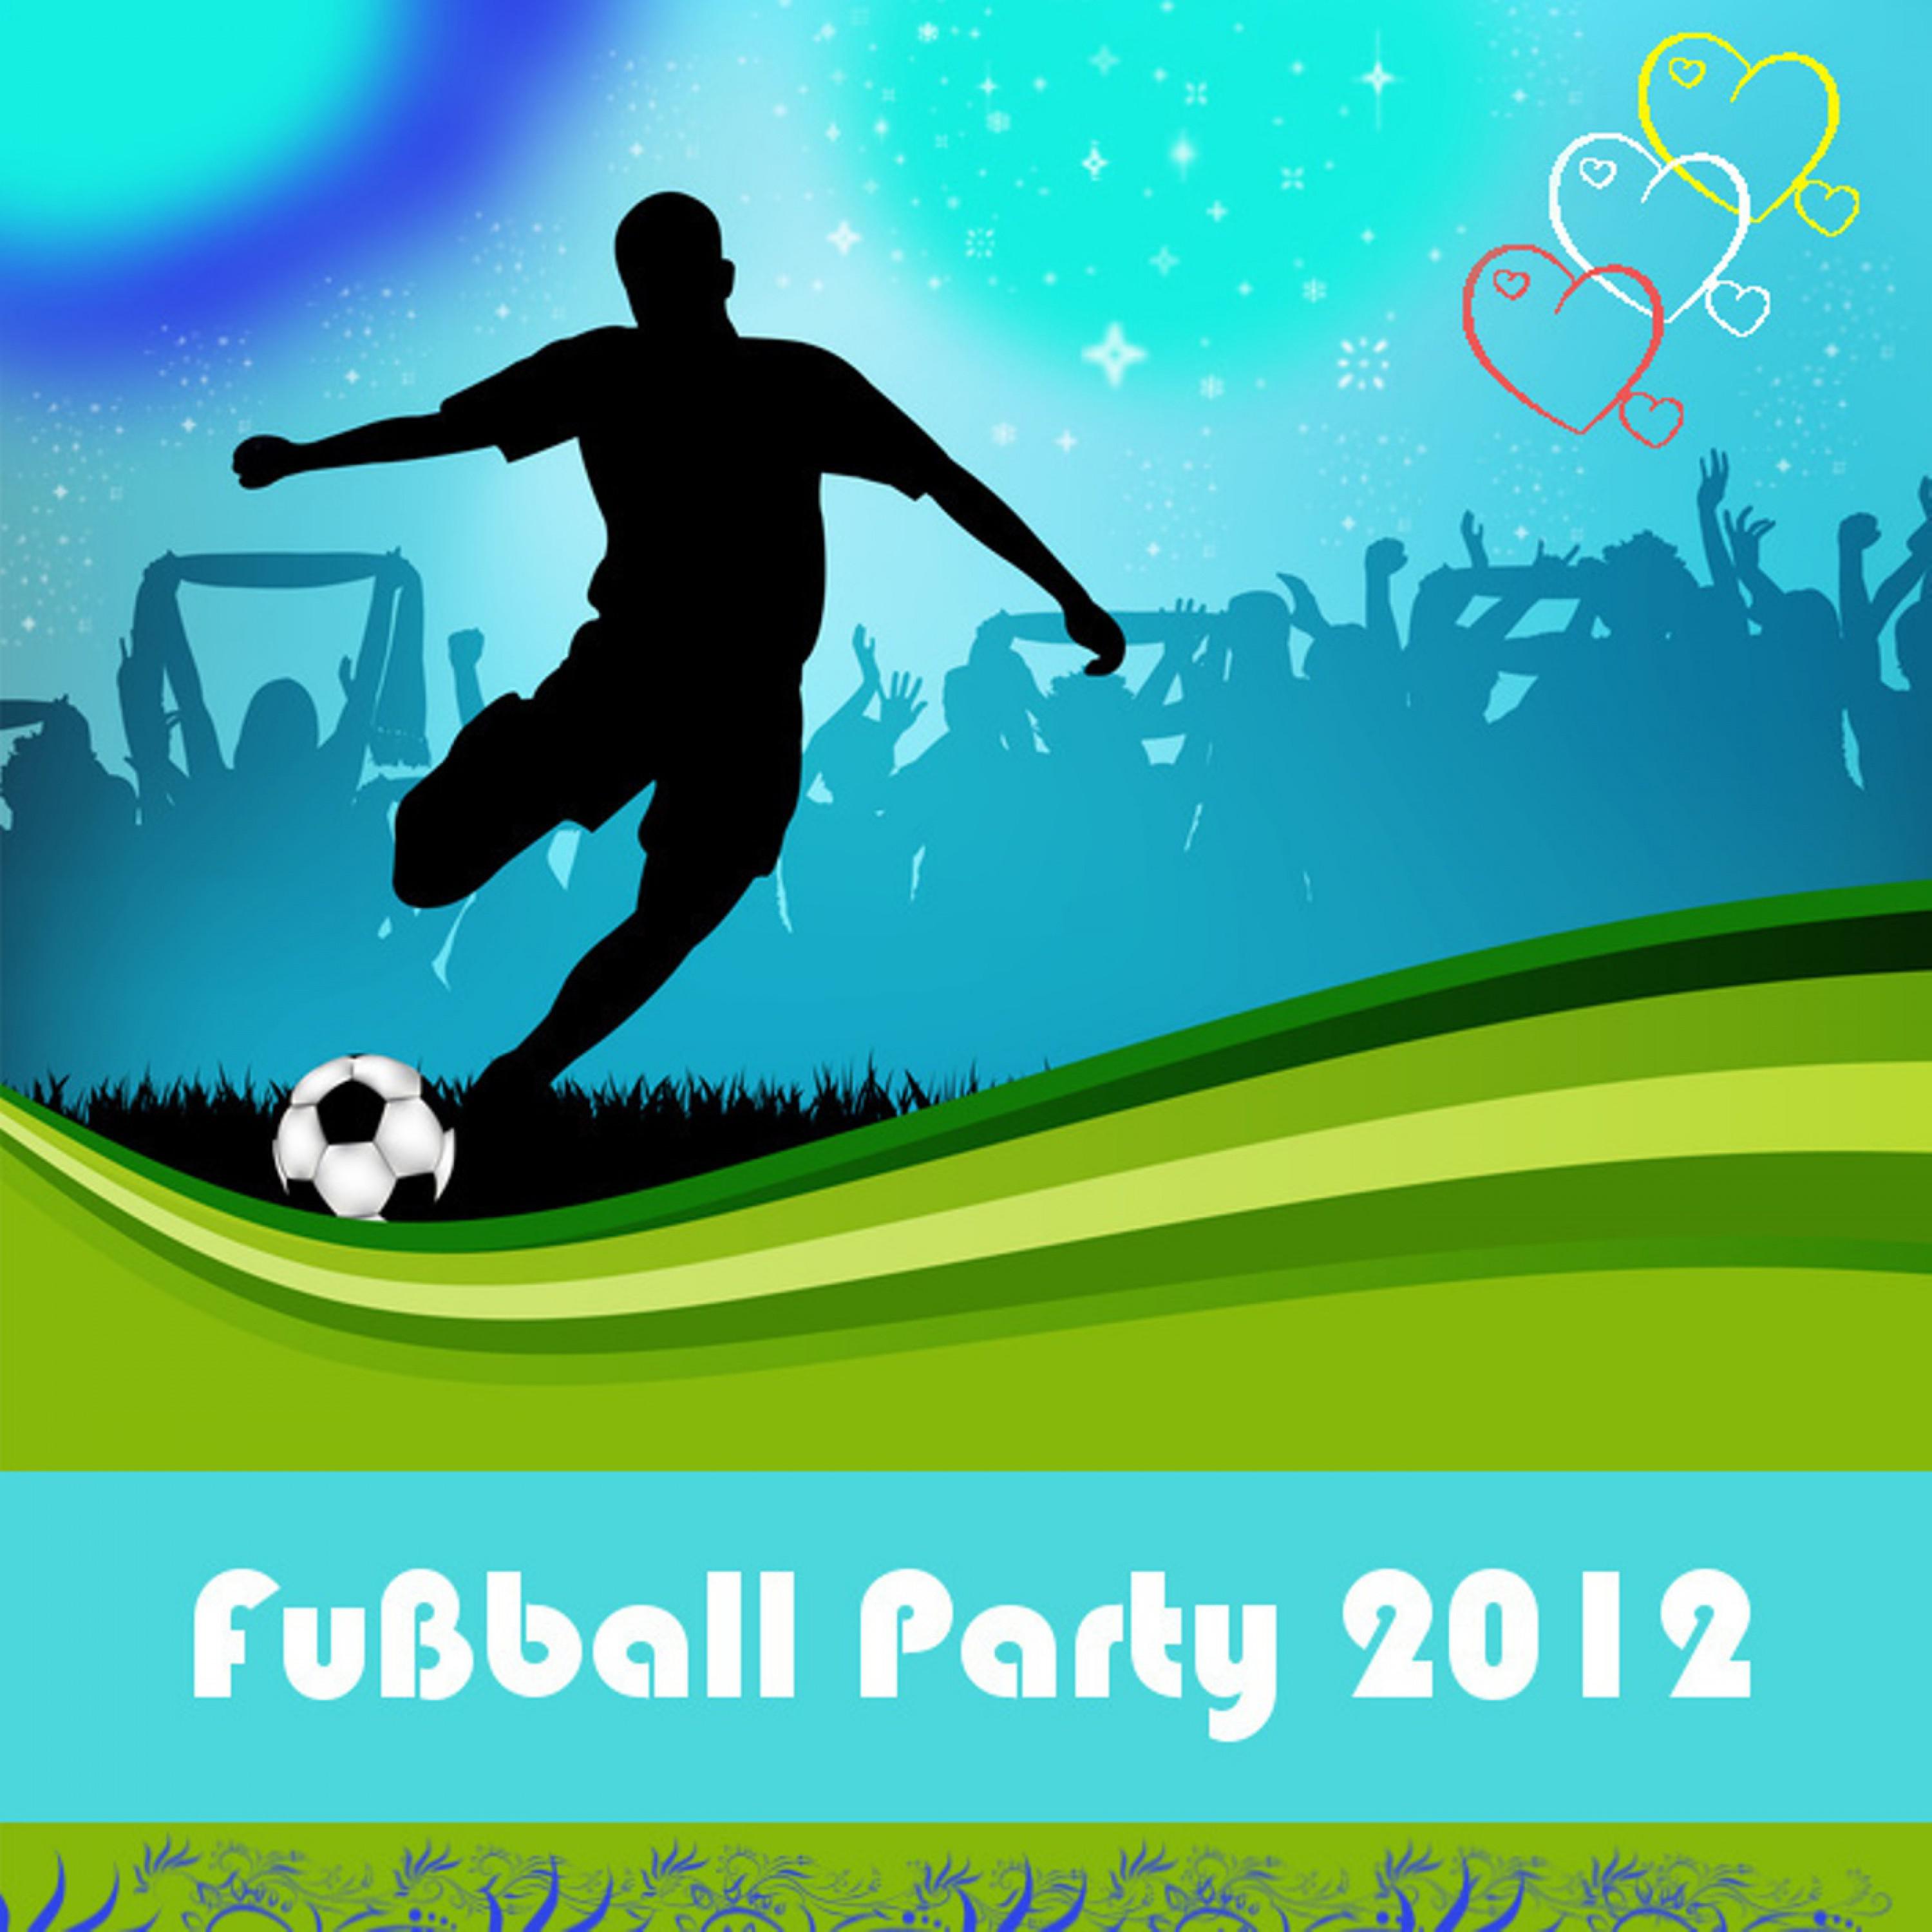 Fu ball Party 2012